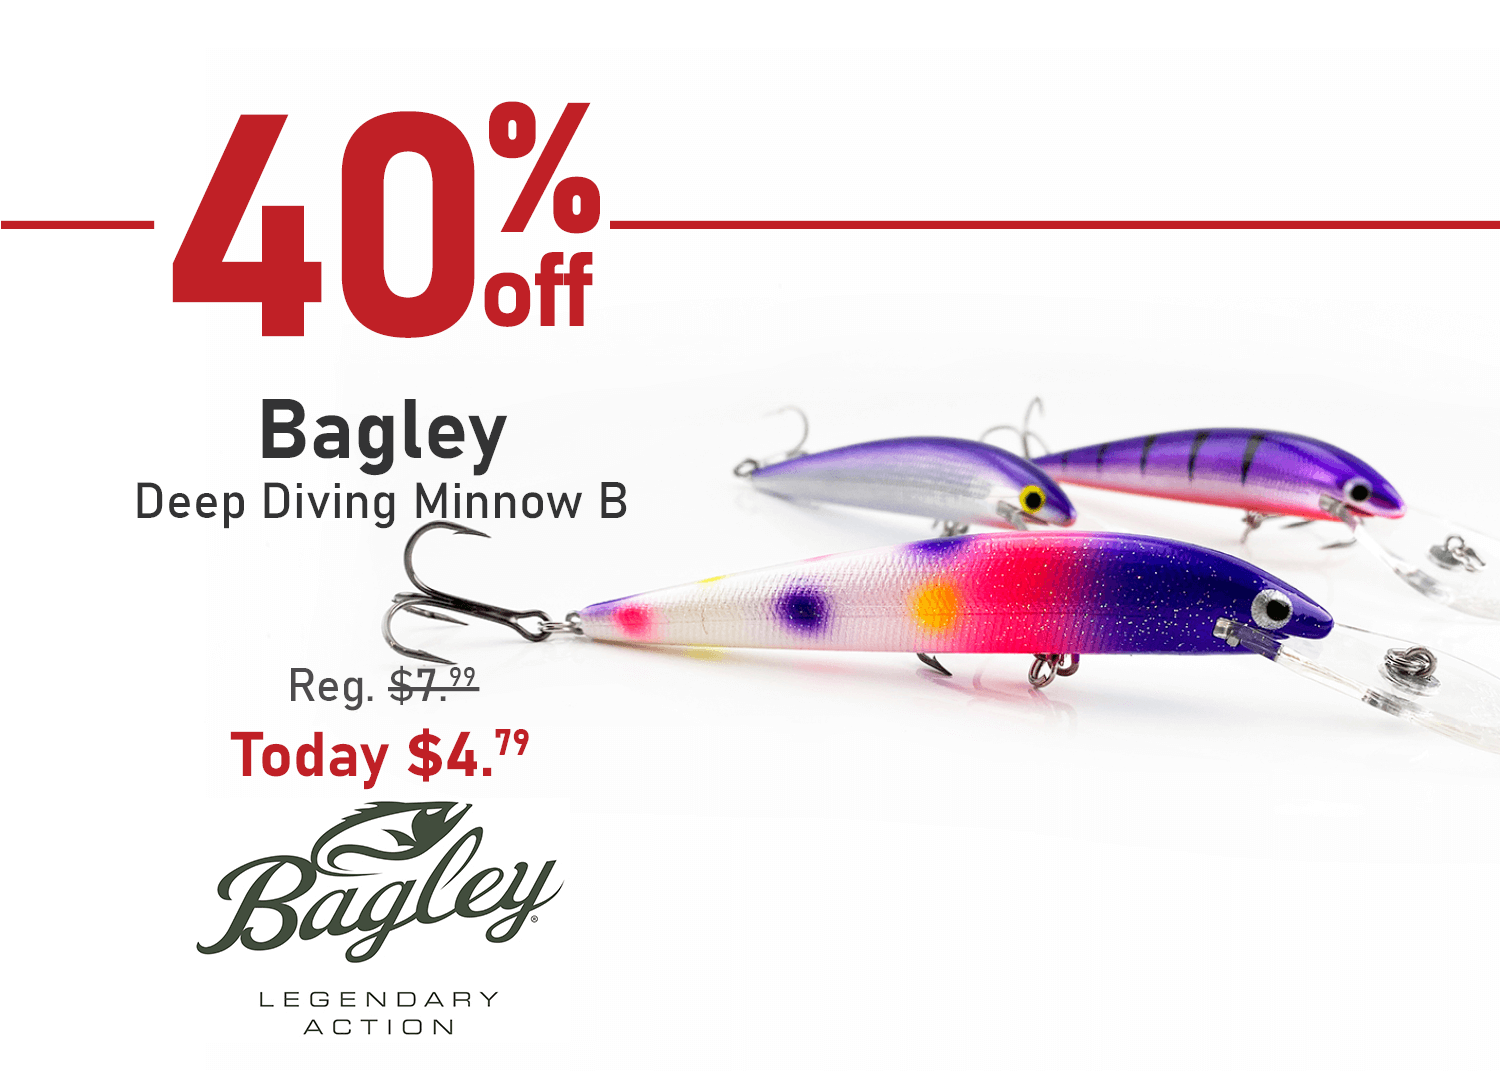 Save 40% on the Bagley Deep Diving Minnow B